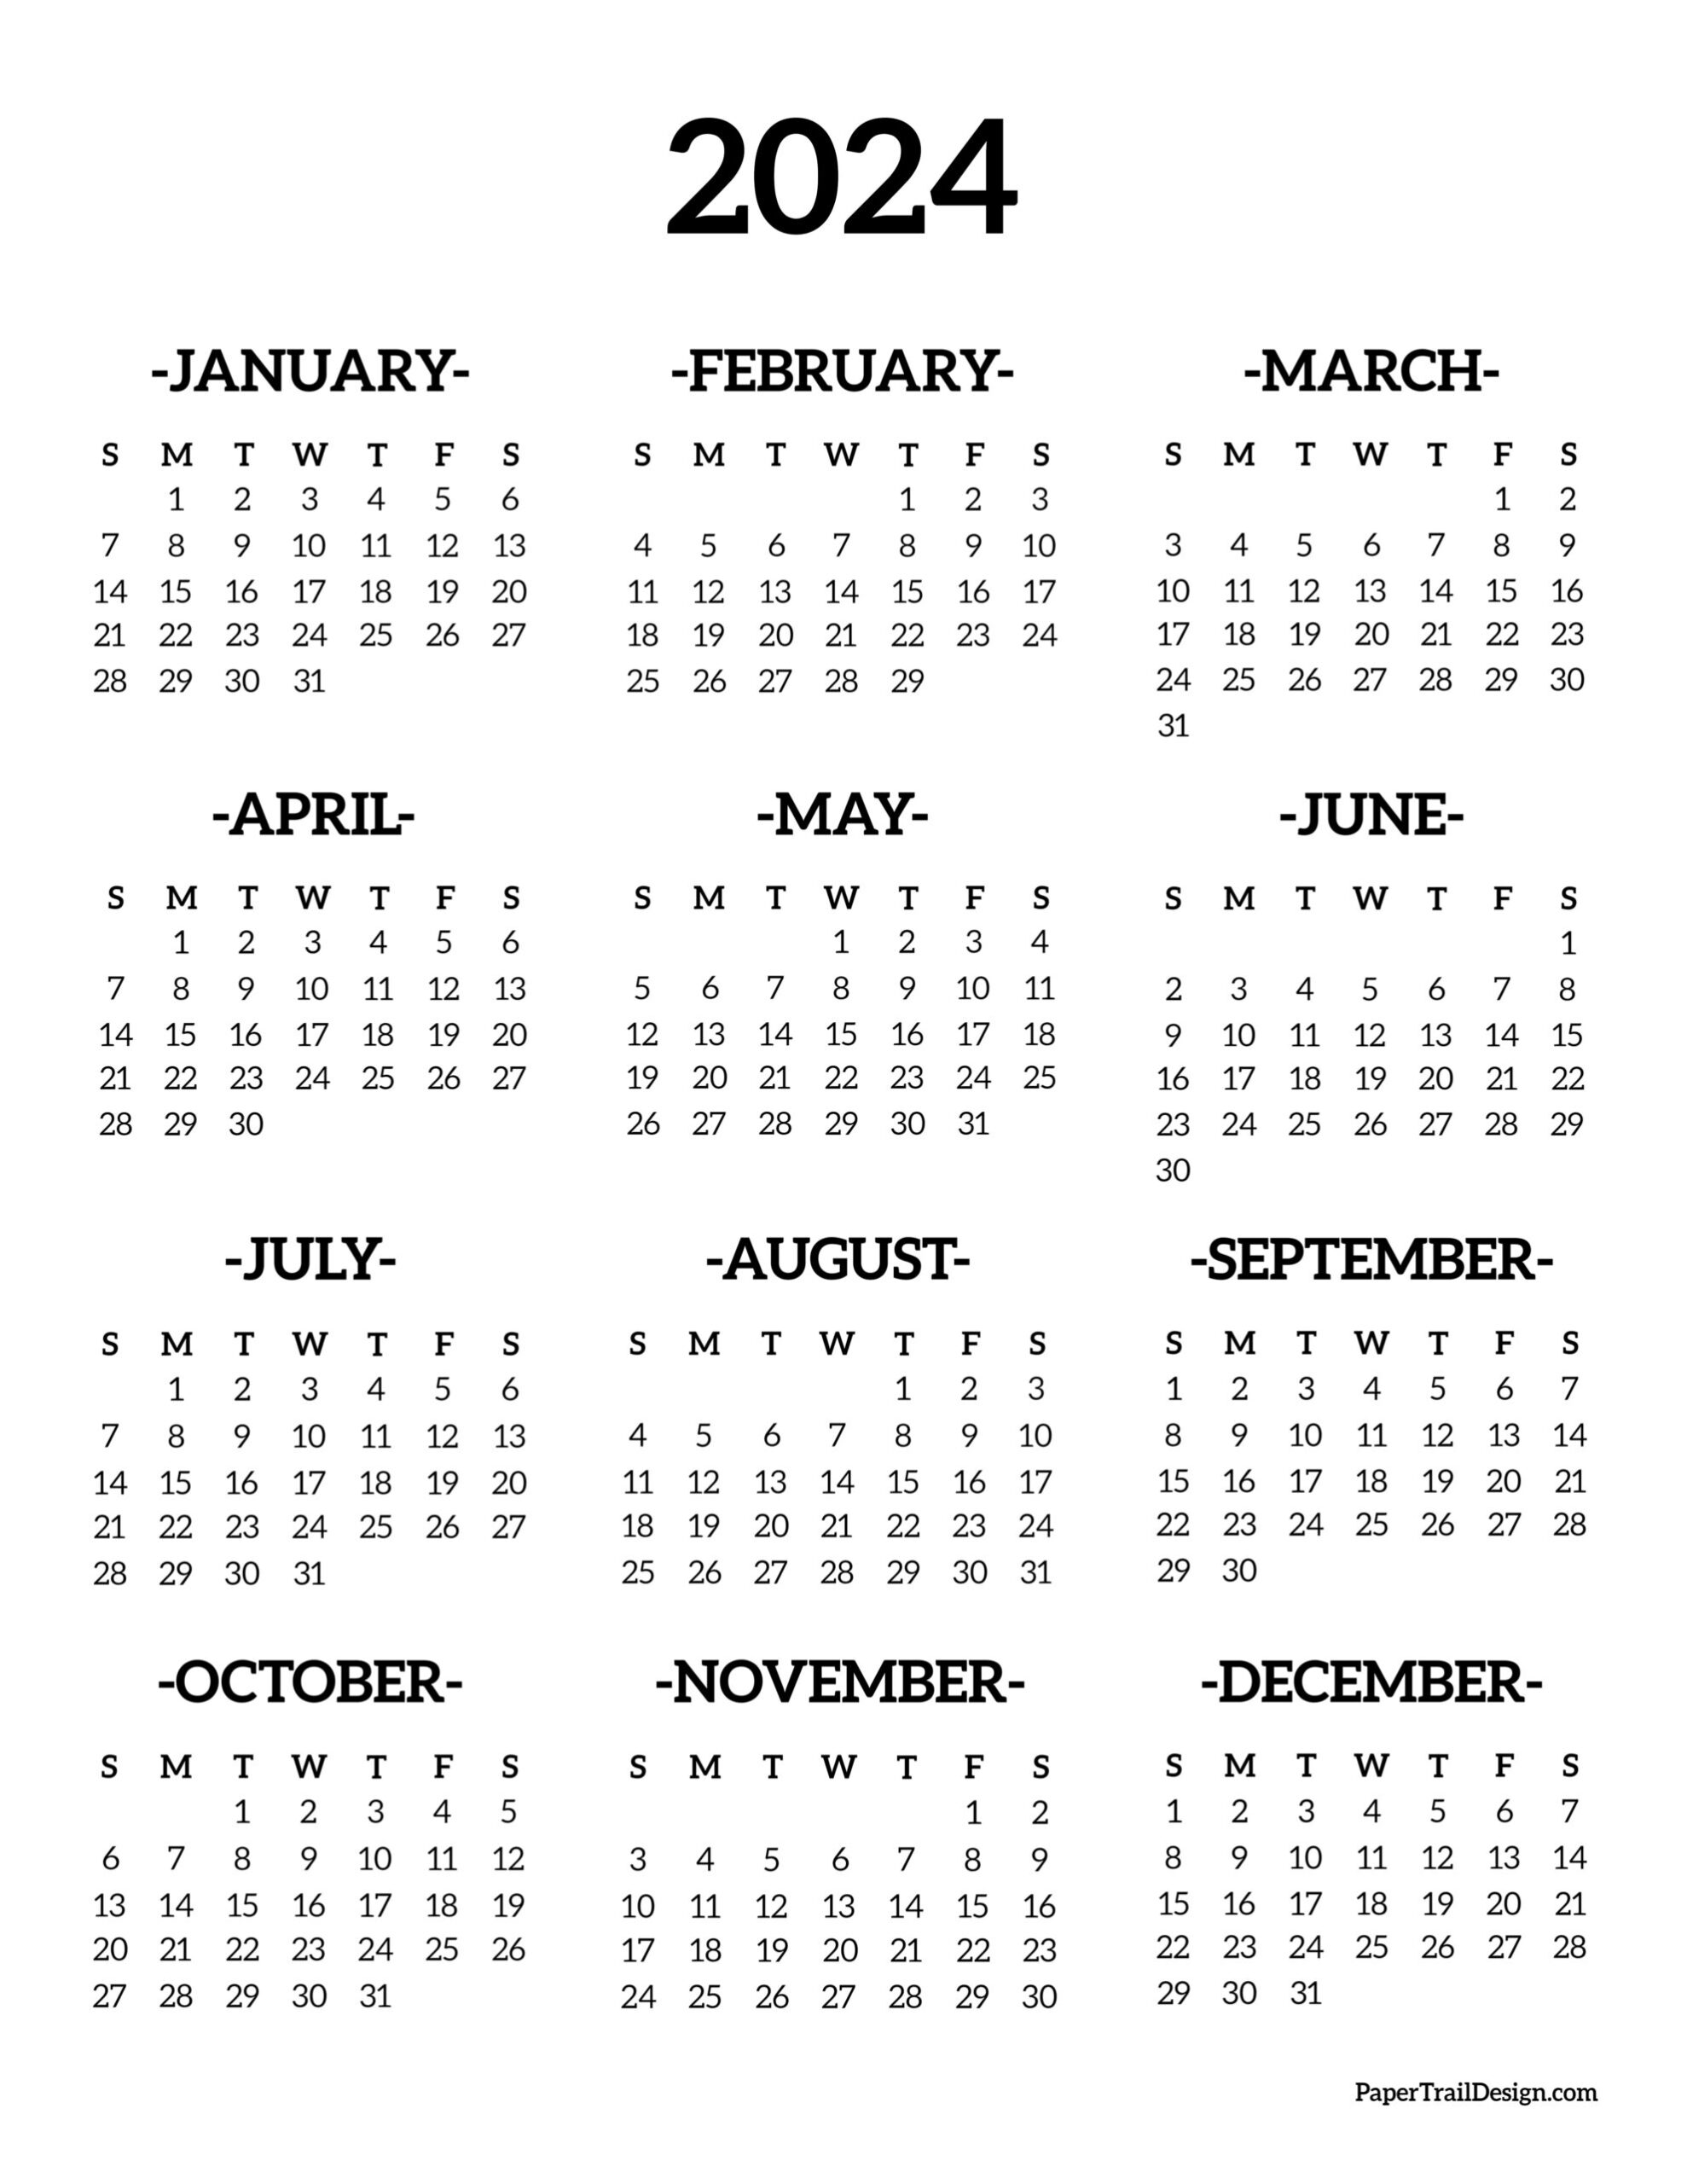 Calendar 2024 Printable One Page - Paper Trail Design for Year Calendar 2024 Printable Free